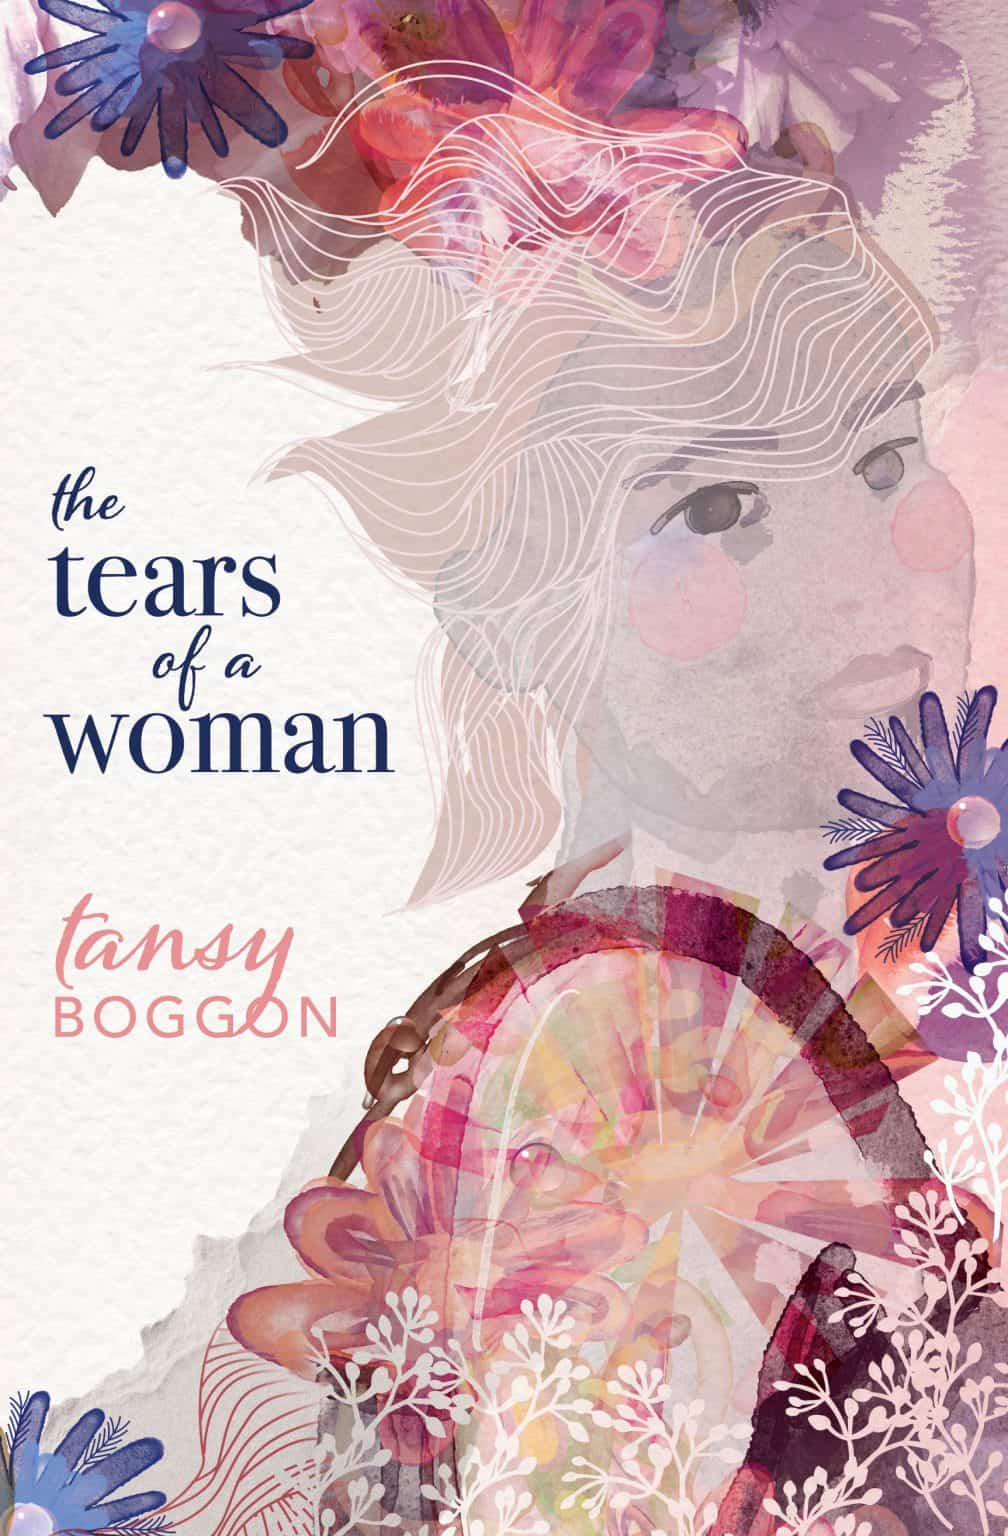 Latest Book by Tansy Boggon